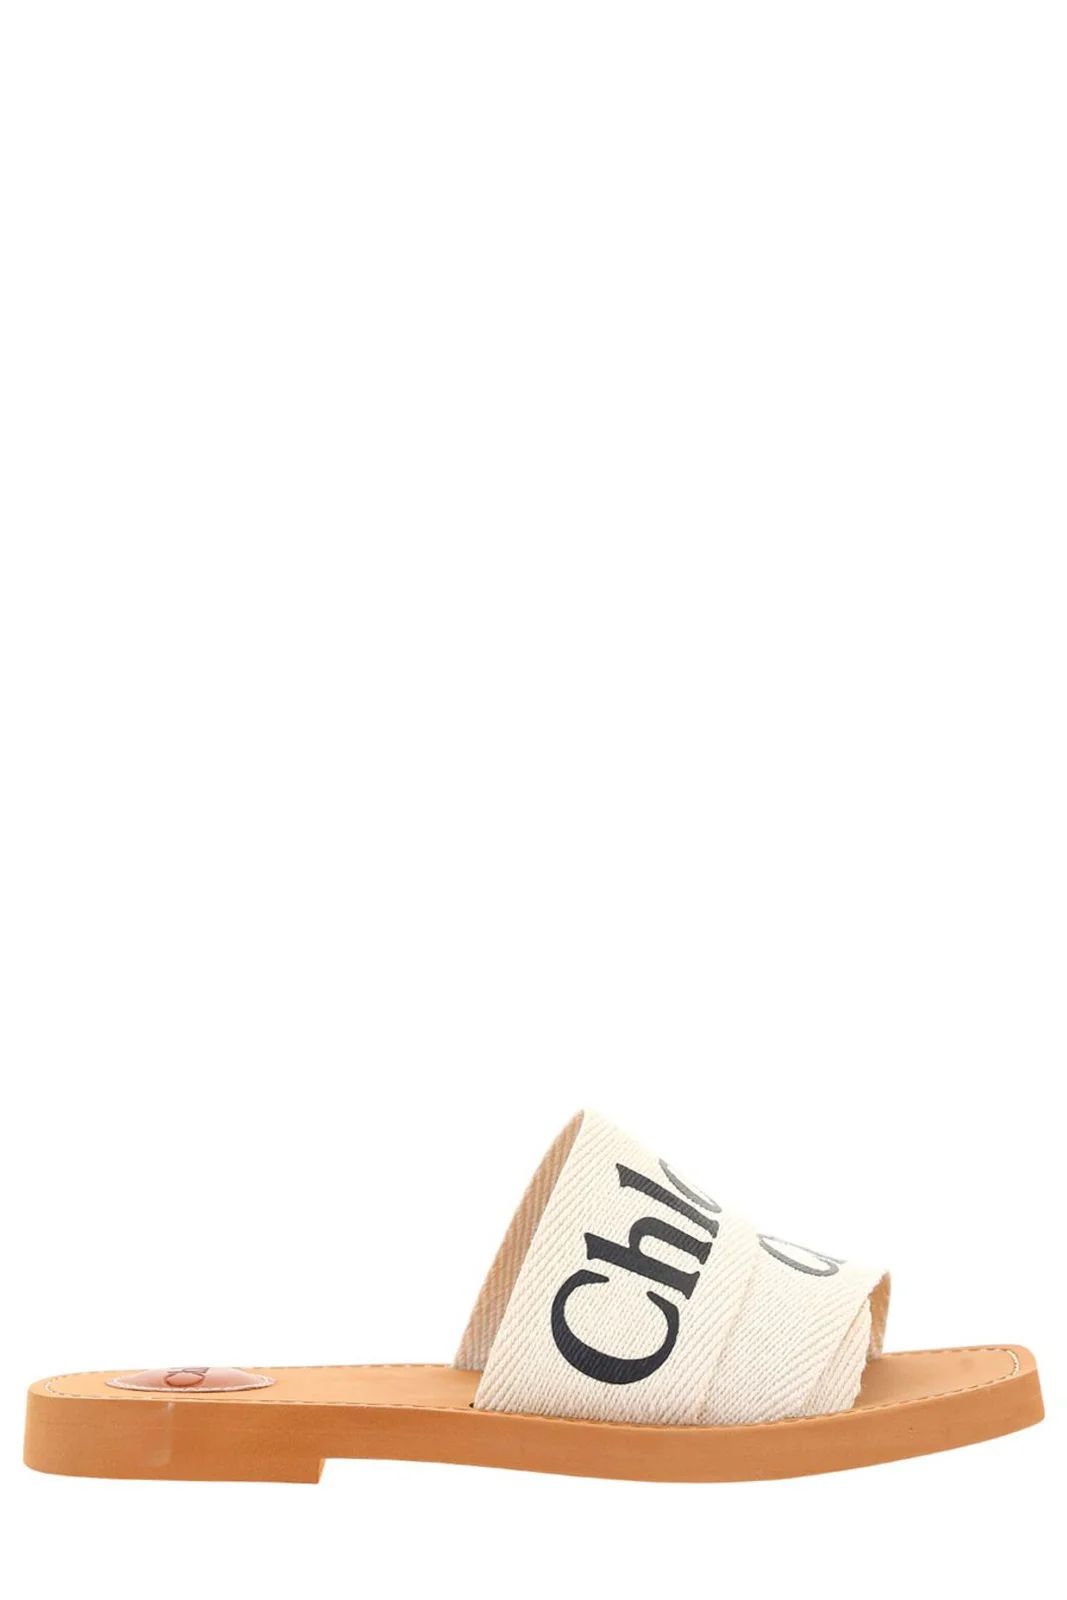 Chloé Woody Logo Embroidered Sandals | Cettire Global